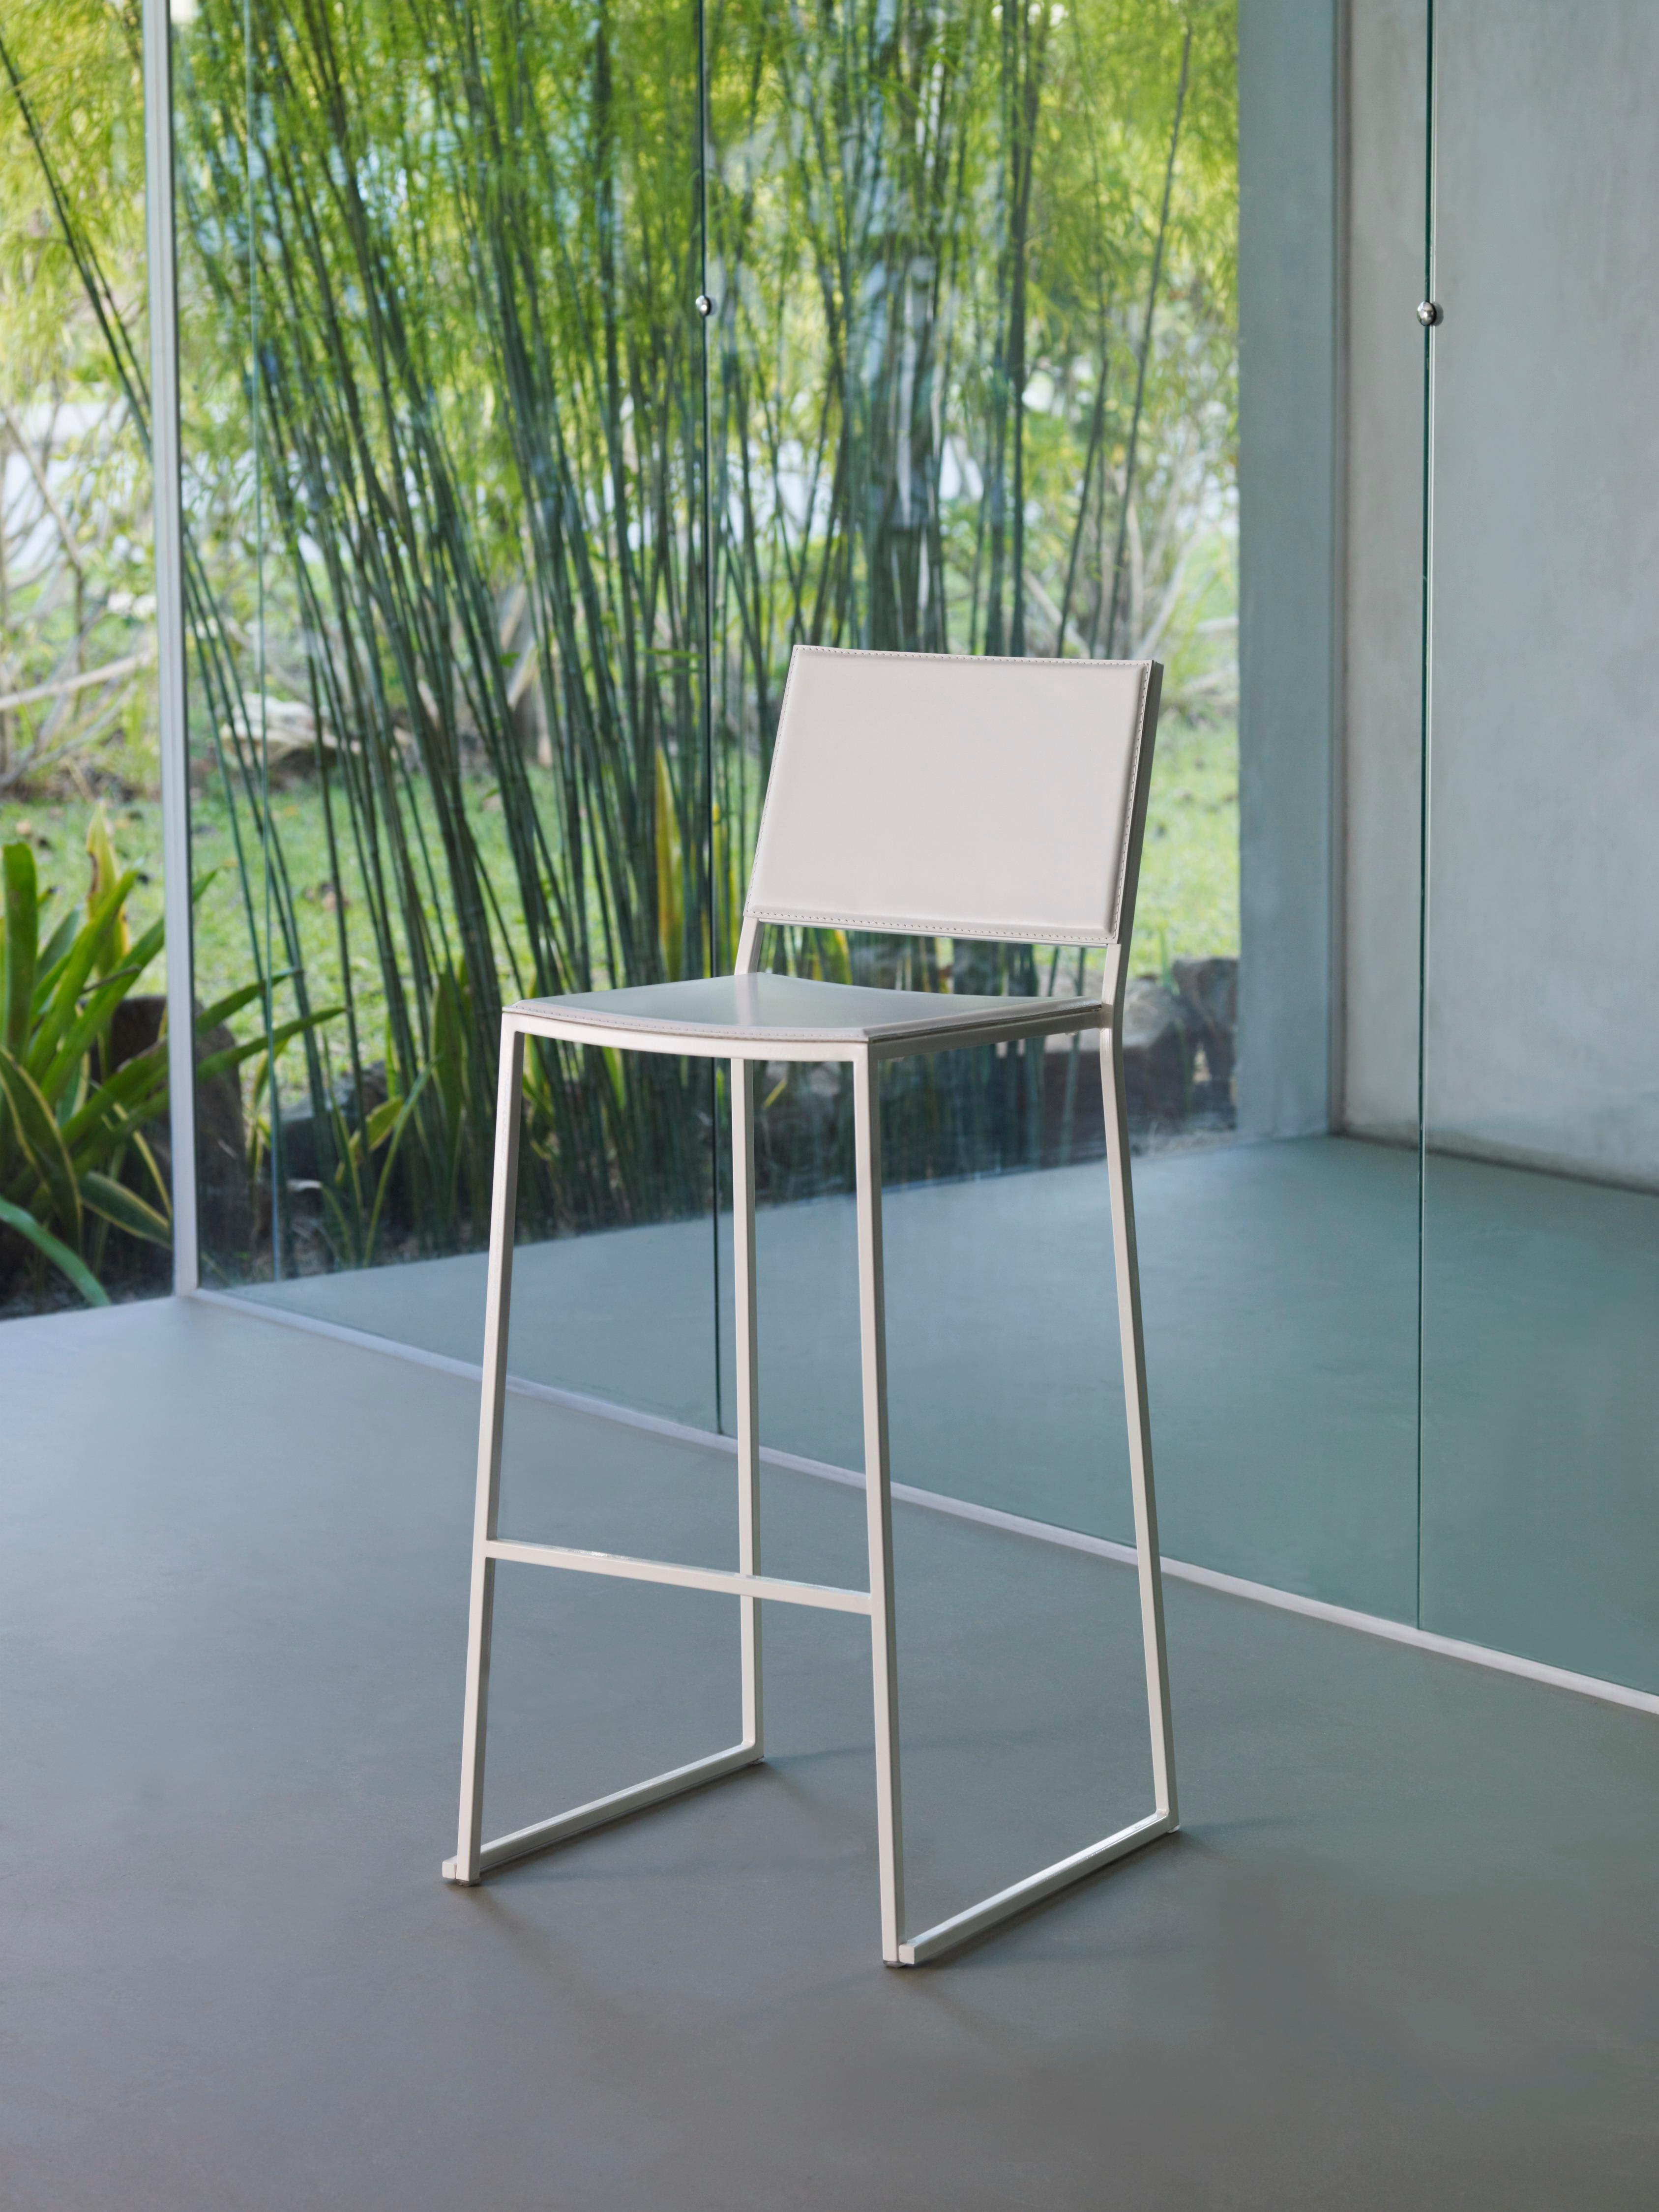 High Básica Bar Stool by Doimo Brasil
Dimensions: W 46 x D 50 x H 104 cm 
Materials: Paint, Natural Leather


With the intention of providing good taste and personality, Doimo deciphers trends and follows the evolution of man and his space. To this